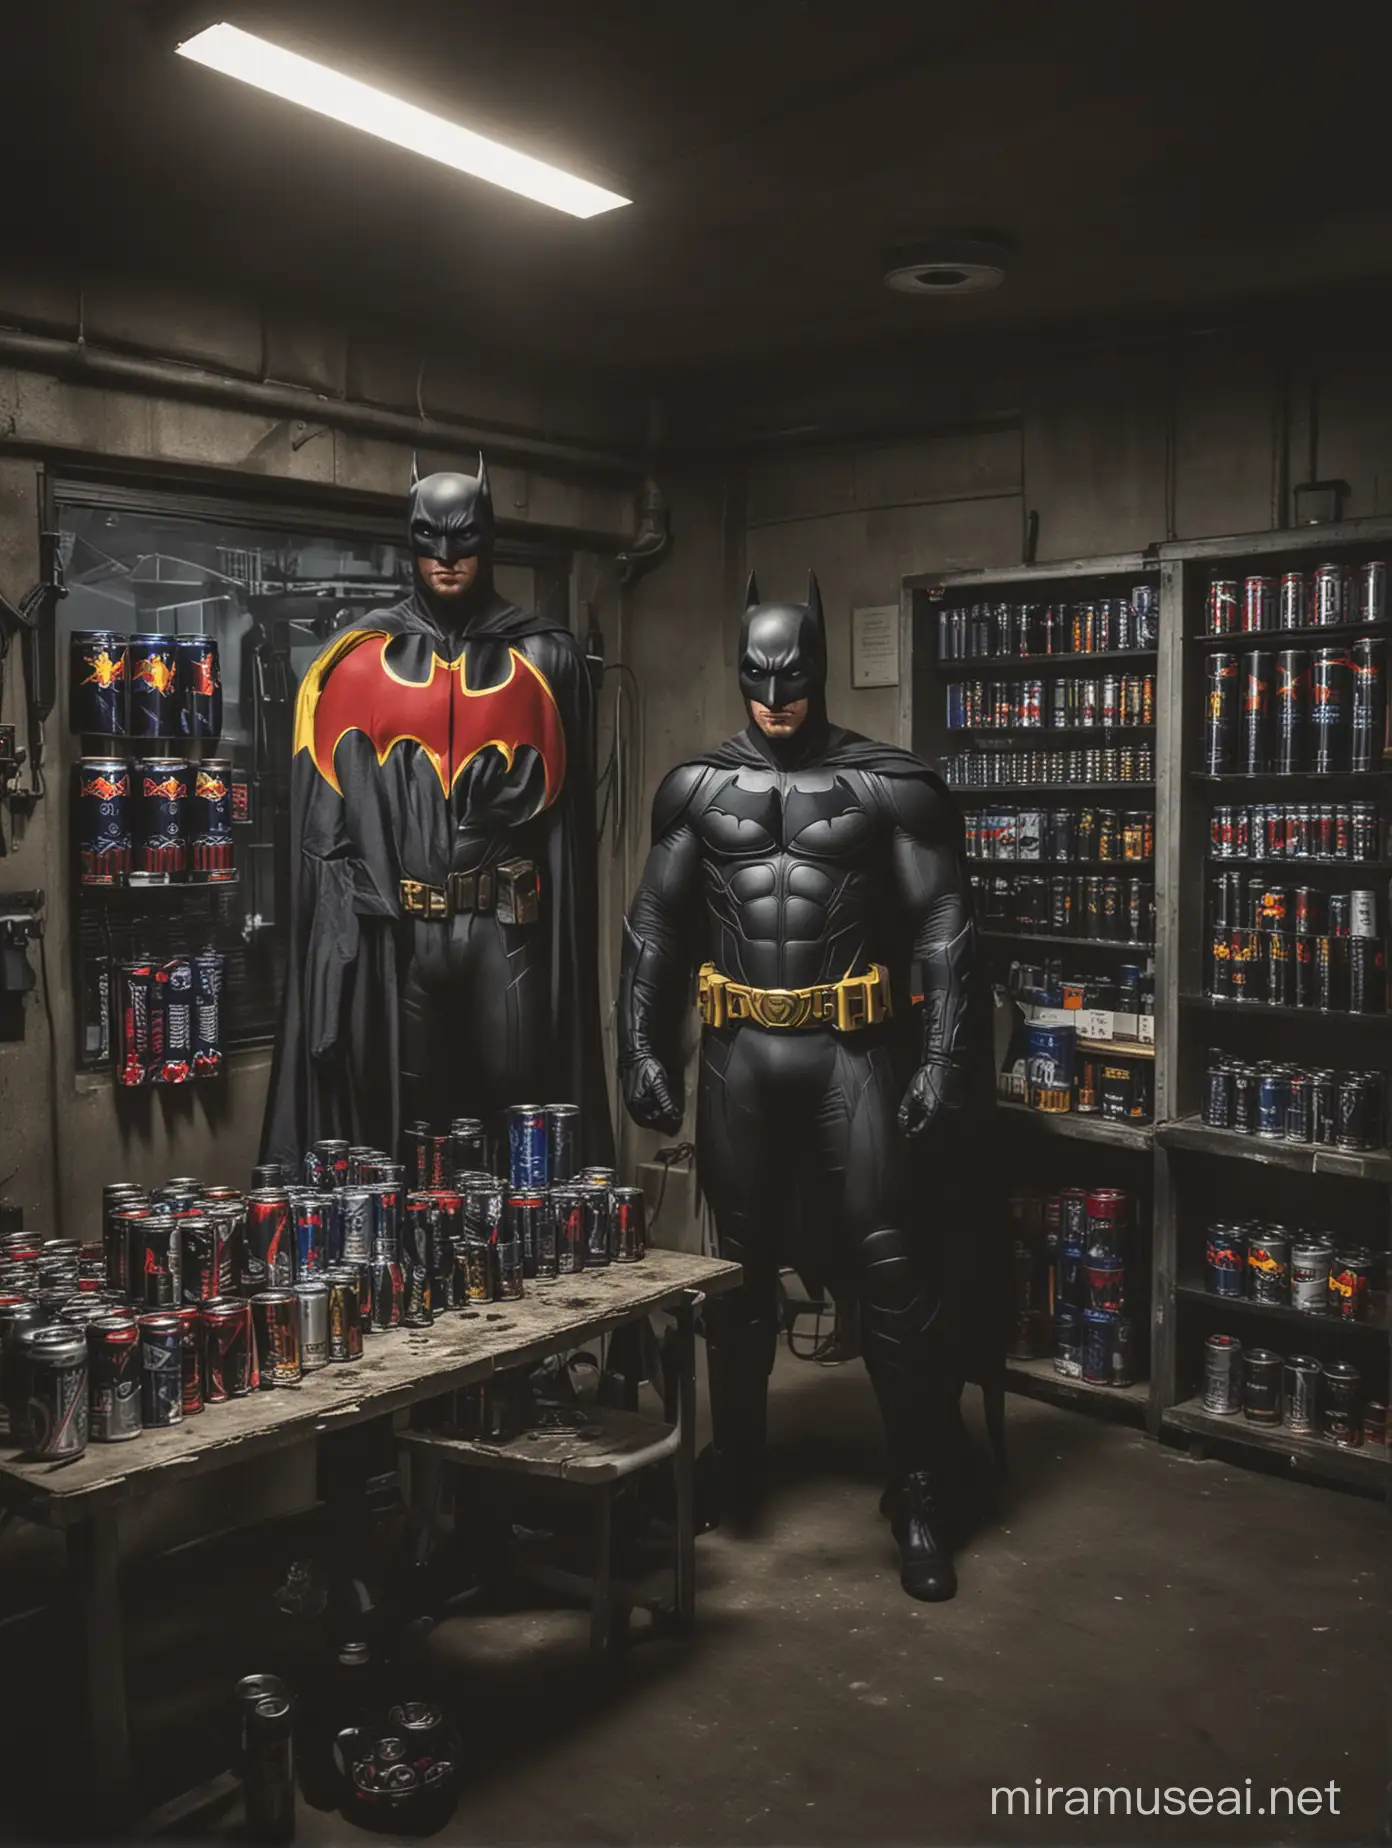 In the Batcave, Batman occasionally drinks Red Bull energy drinks to maintain his energy levels during intense periods of crimefighting or while working on his gadgets and strategies. The caffeine and other stimulants in Red Bull provide a quick energy boost, allowing Batman to stay alert and focused during long hours spent in his basement lair. However, Batman's reliance on energy drinks is minimal compared to his dedication to physical training and mental discipline.